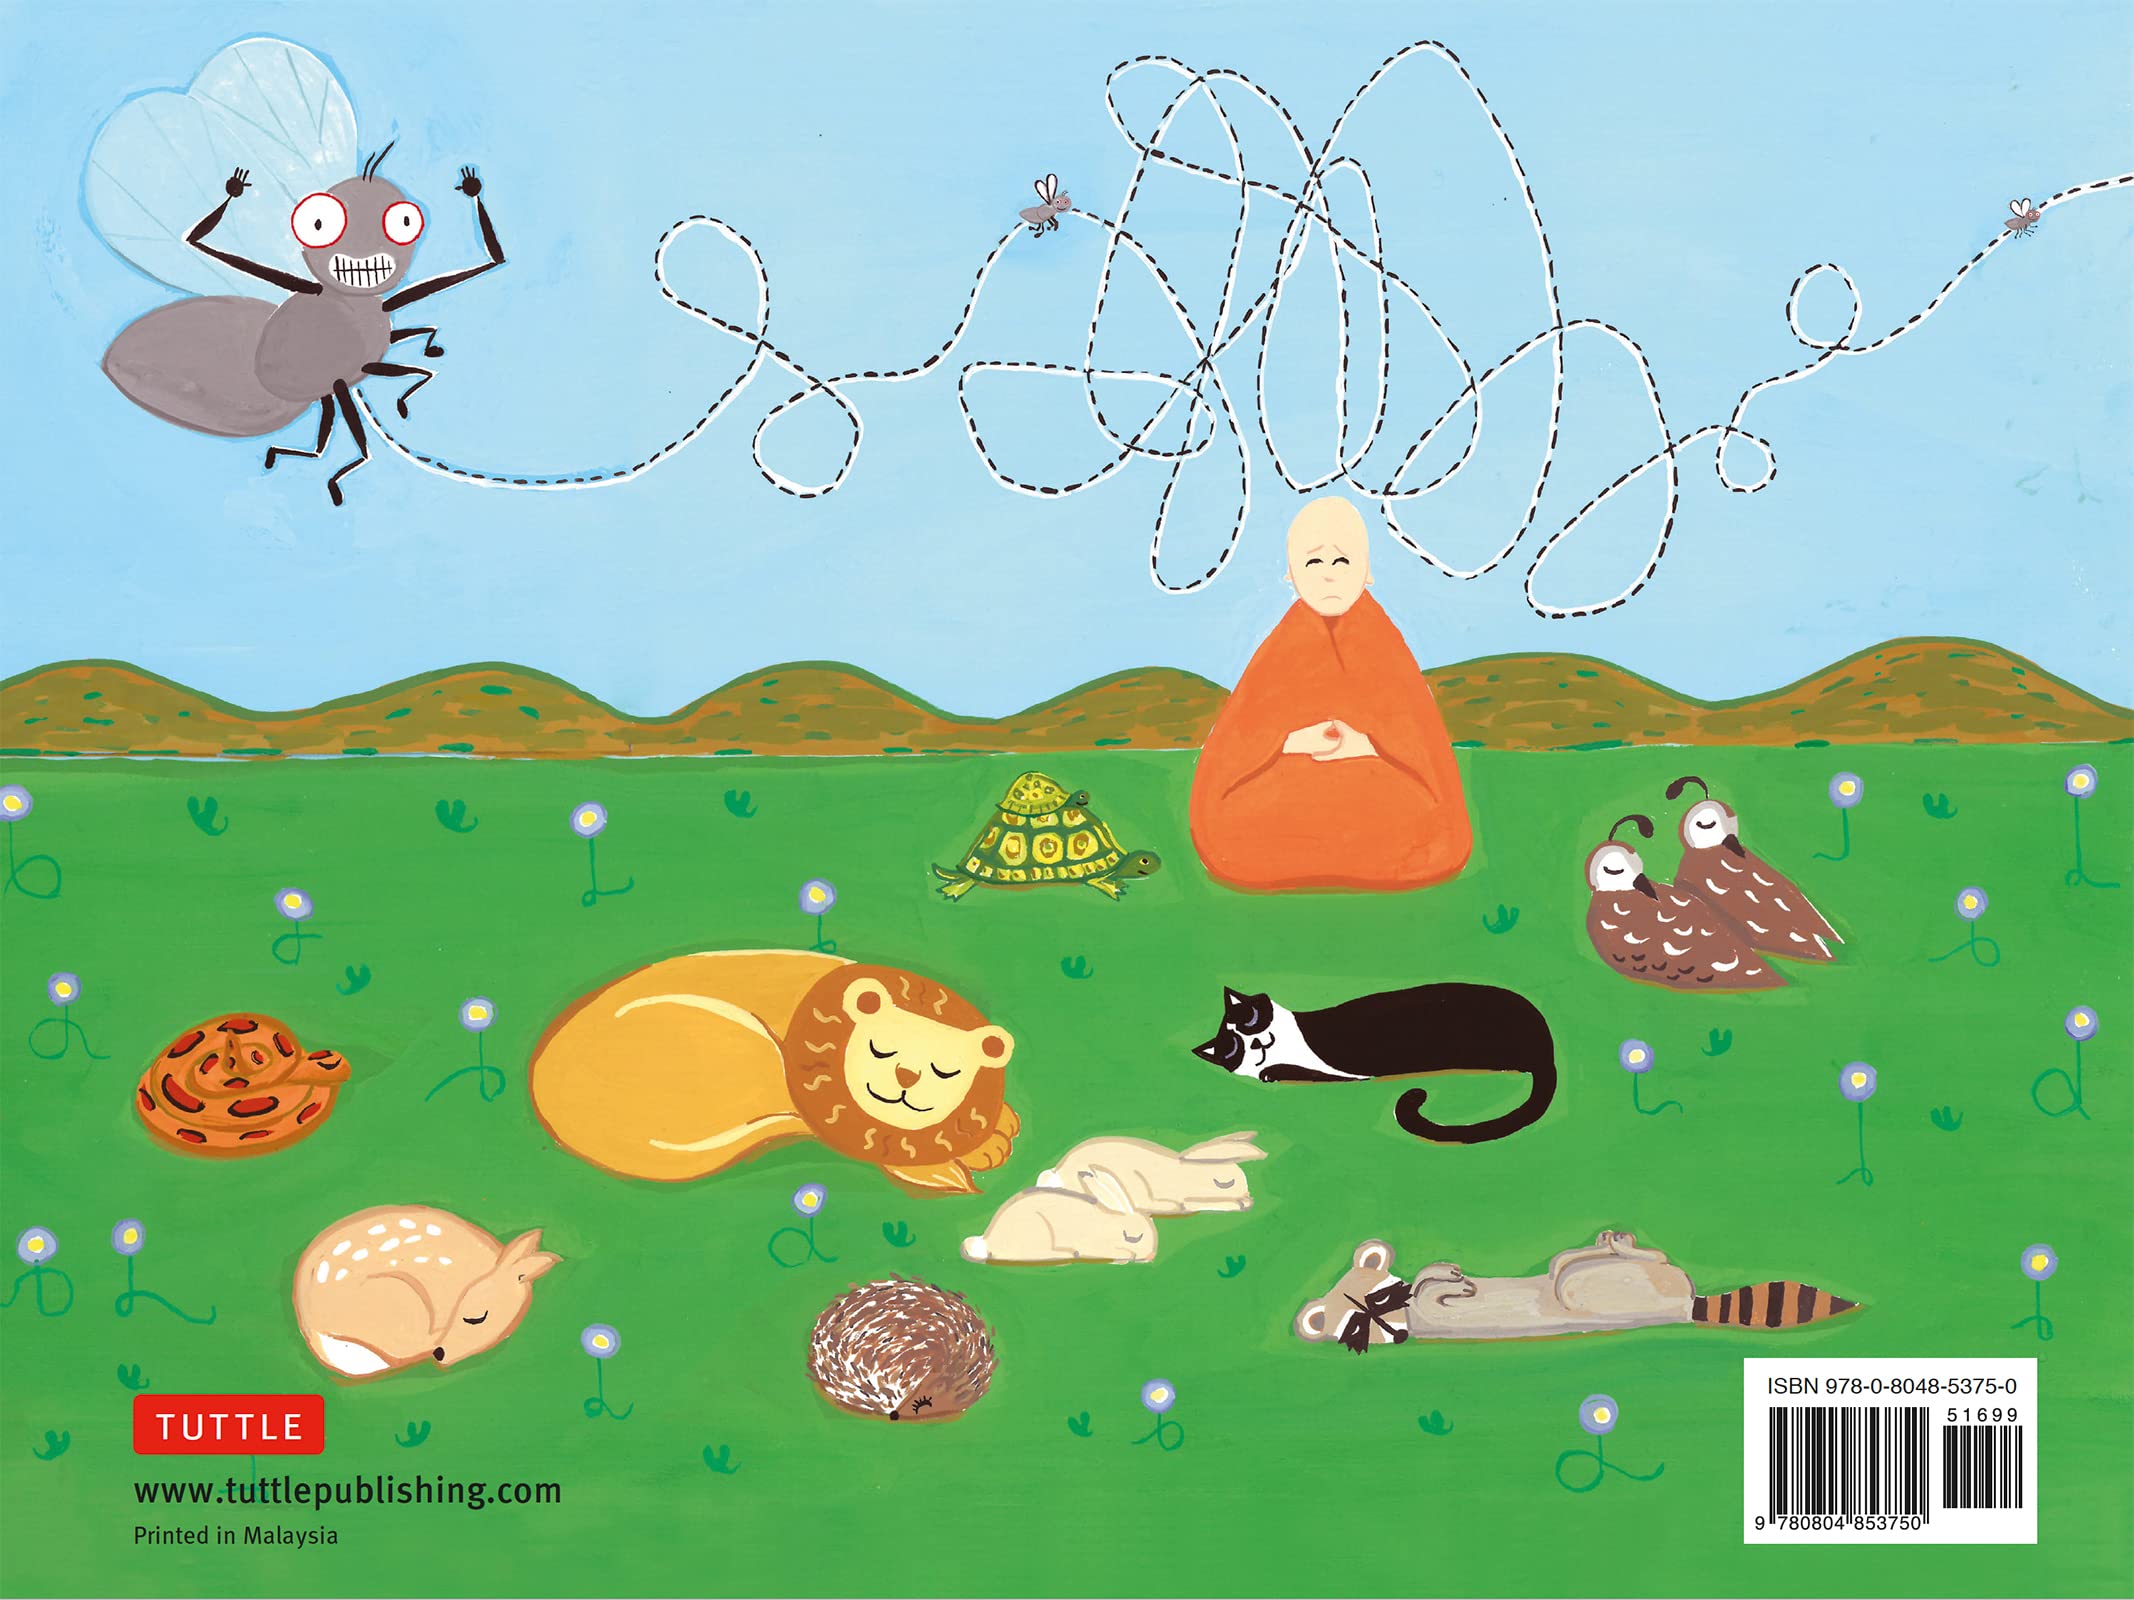 The Angry Monk and the Fly: A Tale of Mindfulness for Children Hardcover